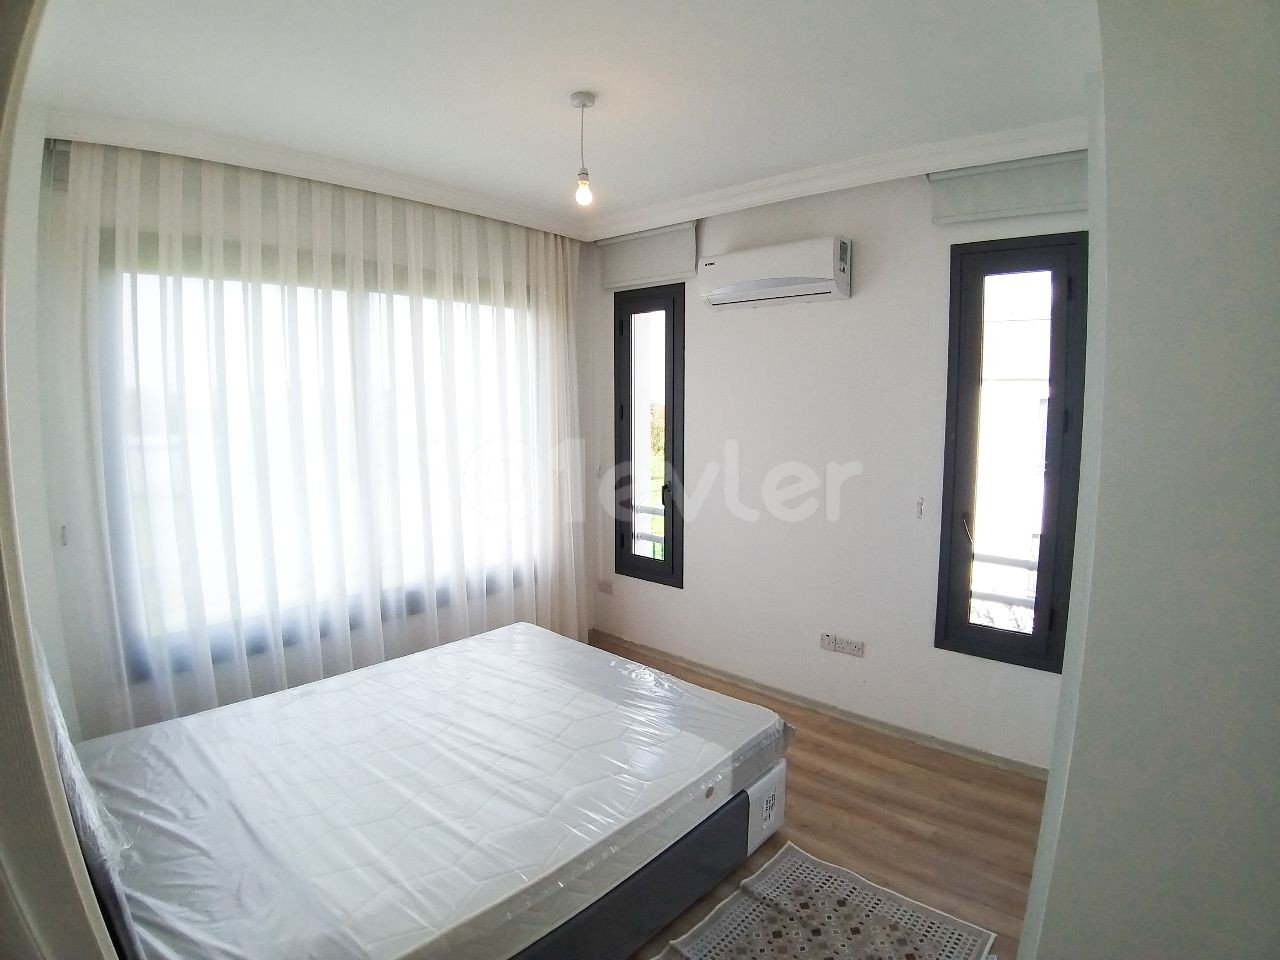 2+1 Flat for Rent in Alsancak, within walking distance to the main street and the sea